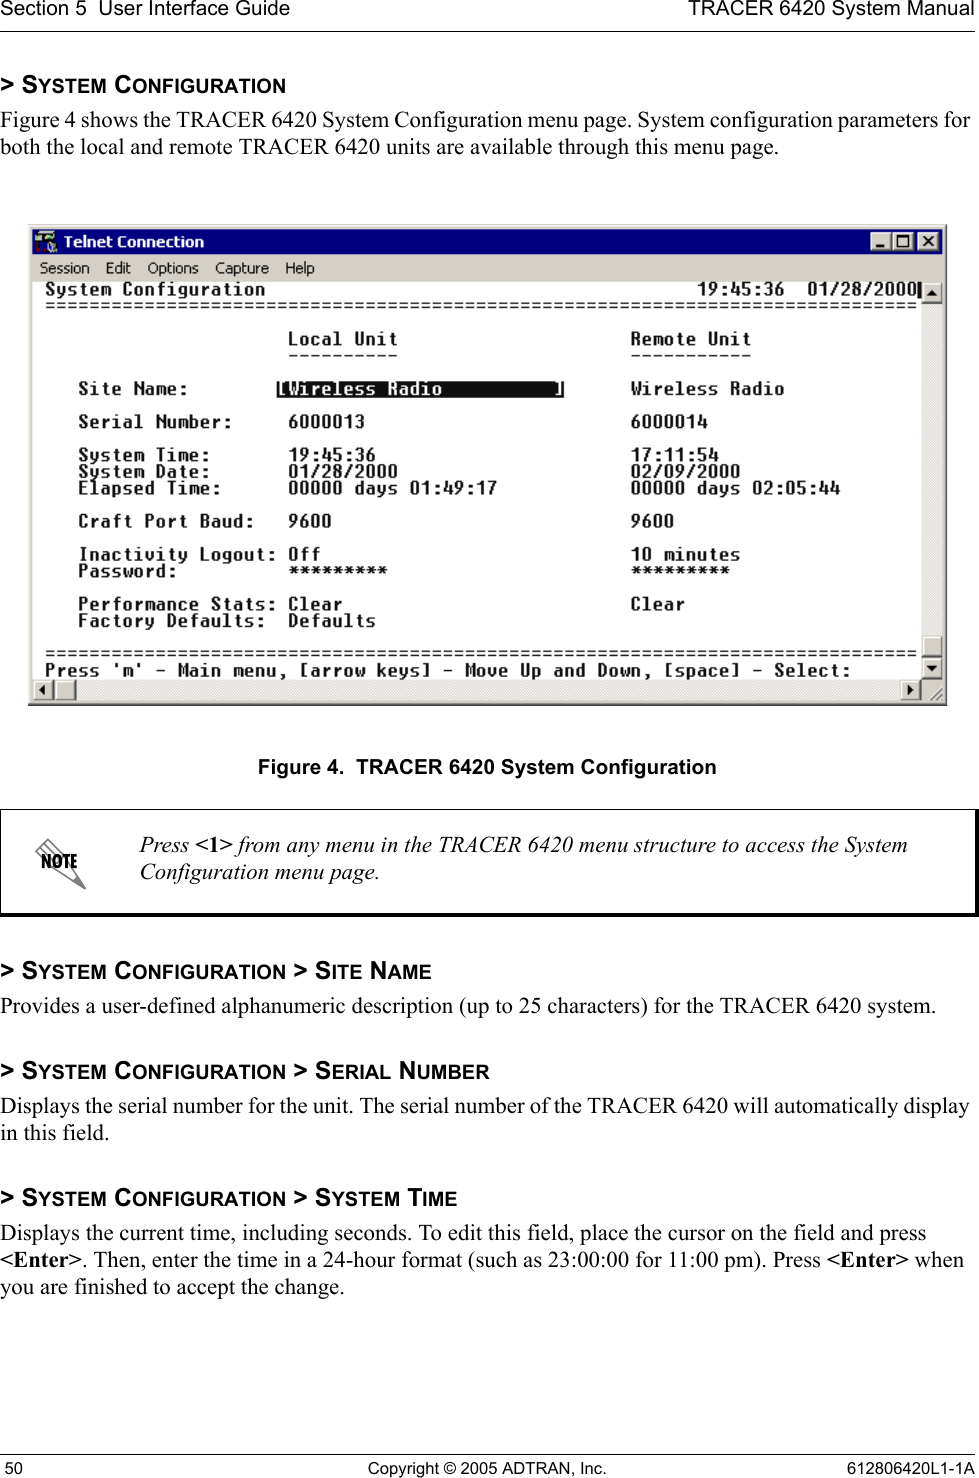 Section 5  User Interface Guide TRACER 6420 System Manual 50 Copyright © 2005 ADTRAN, Inc. 612806420L1-1A&gt; SYSTEM CONFIGURATIONFigure 4 shows the TRACER 6420 System Configuration menu page. System configuration parameters for both the local and remote TRACER 6420 units are available through this menu page.Figure 4.  TRACER 6420 System Configuration&gt; SYSTEM CONFIGURATION &gt; SITE NAMEProvides a user-defined alphanumeric description (up to 25 characters) for the TRACER 6420 system.&gt; SYSTEM CONFIGURATION &gt; SERIAL NUMBERDisplays the serial number for the unit. The serial number of the TRACER 6420 will automatically display in this field.&gt; SYSTEM CONFIGURATION &gt; SYSTEM TIMEDisplays the current time, including seconds. To edit this field, place the cursor on the field and press &lt;Enter&gt;. Then, enter the time in a 24-hour format (such as 23:00:00 for 11:00 pm). Press &lt;Enter&gt; when you are finished to accept the change. Press &lt;1&gt; from any menu in the TRACER 6420 menu structure to access the System Configuration menu page.